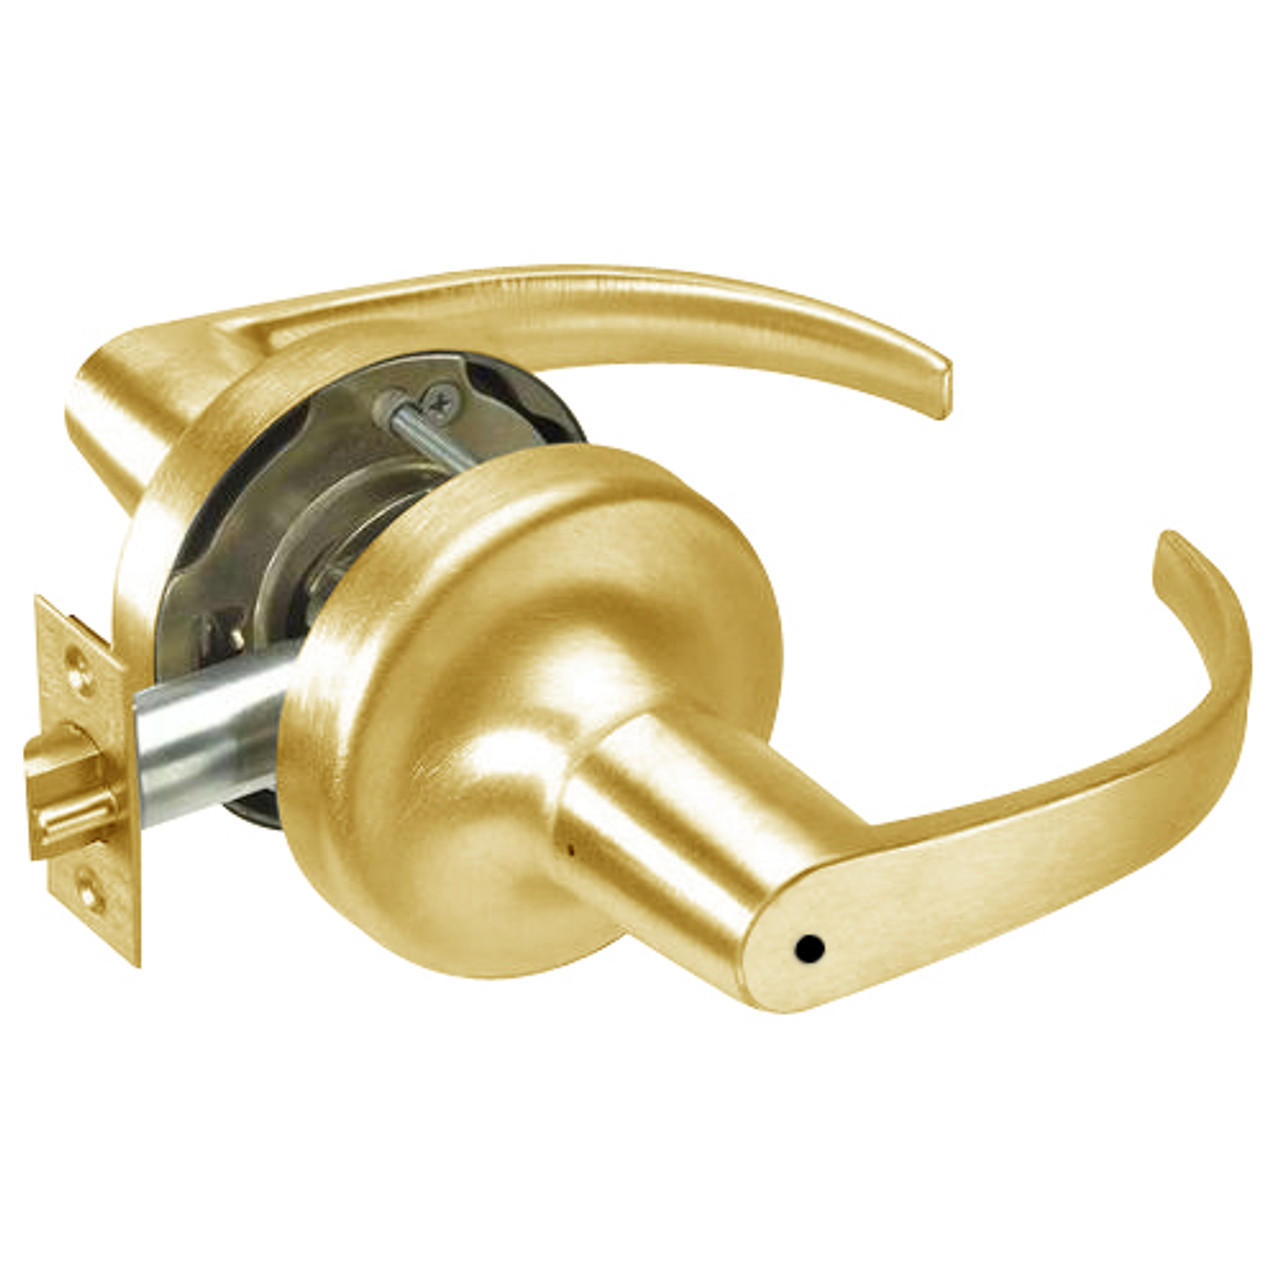 PB5402LN-605 Yale 5400LN Series Non-Keyed Privacy Cylindrical Locks with Pacific Beach Lever in Bright Brass